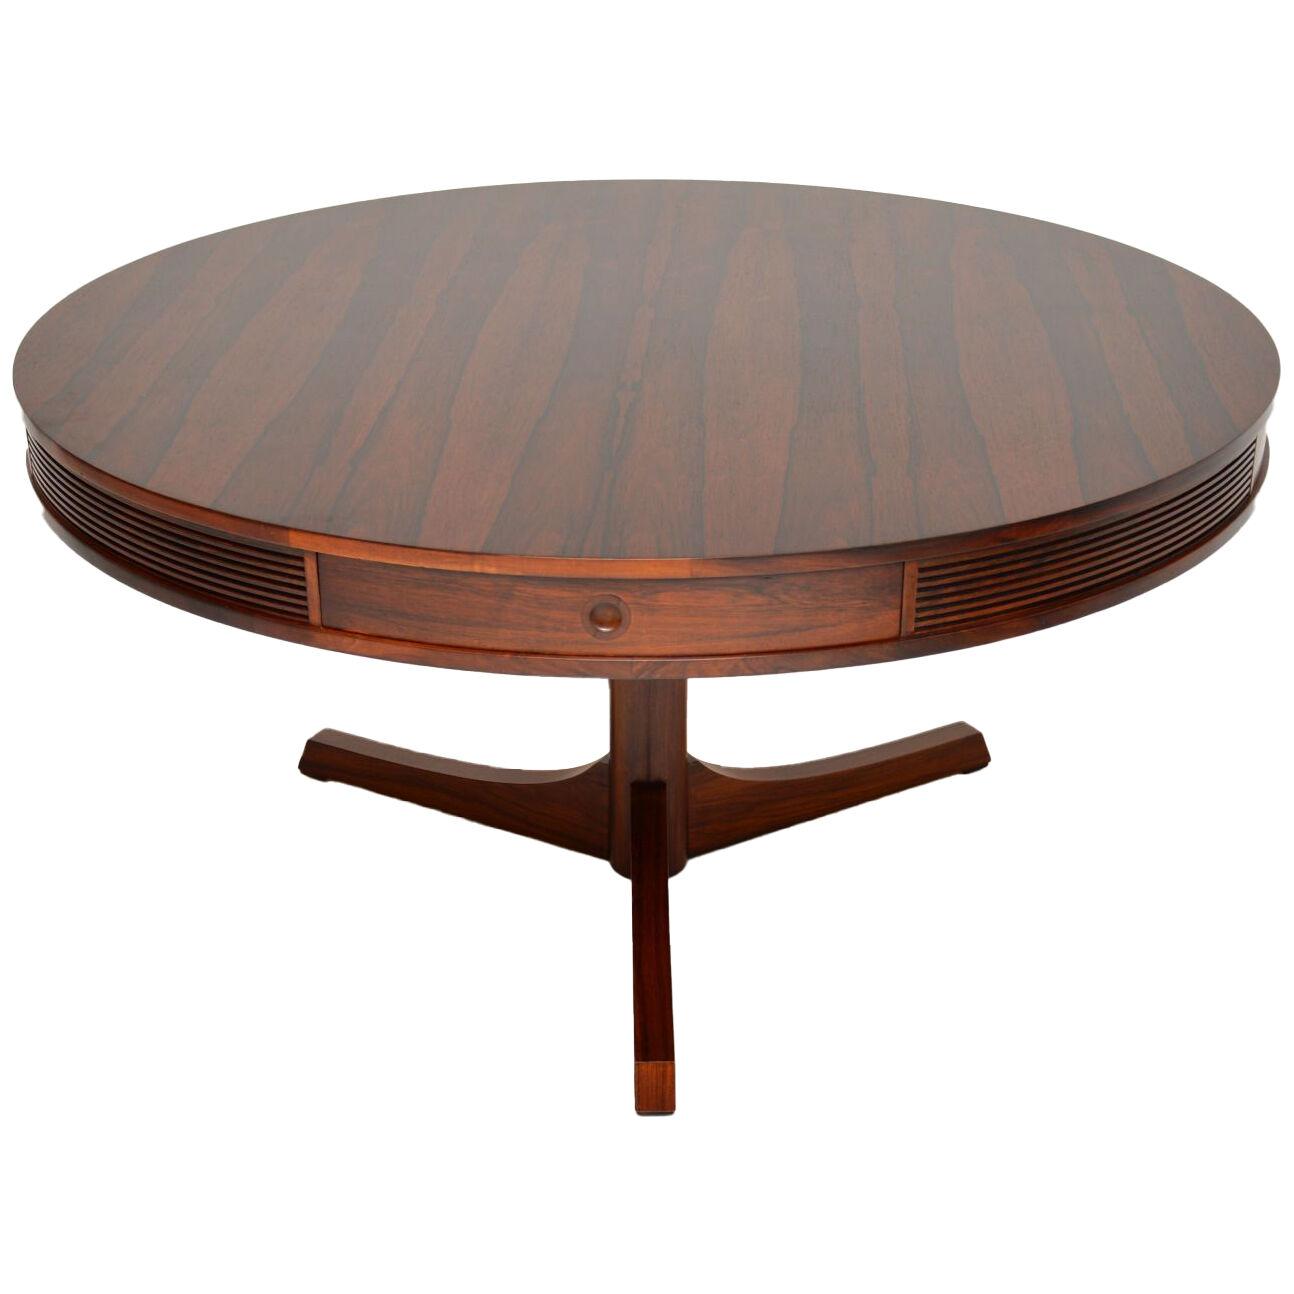 1960's Vintage Rosewood Dining Table by Robert Heritage for Archie Shine